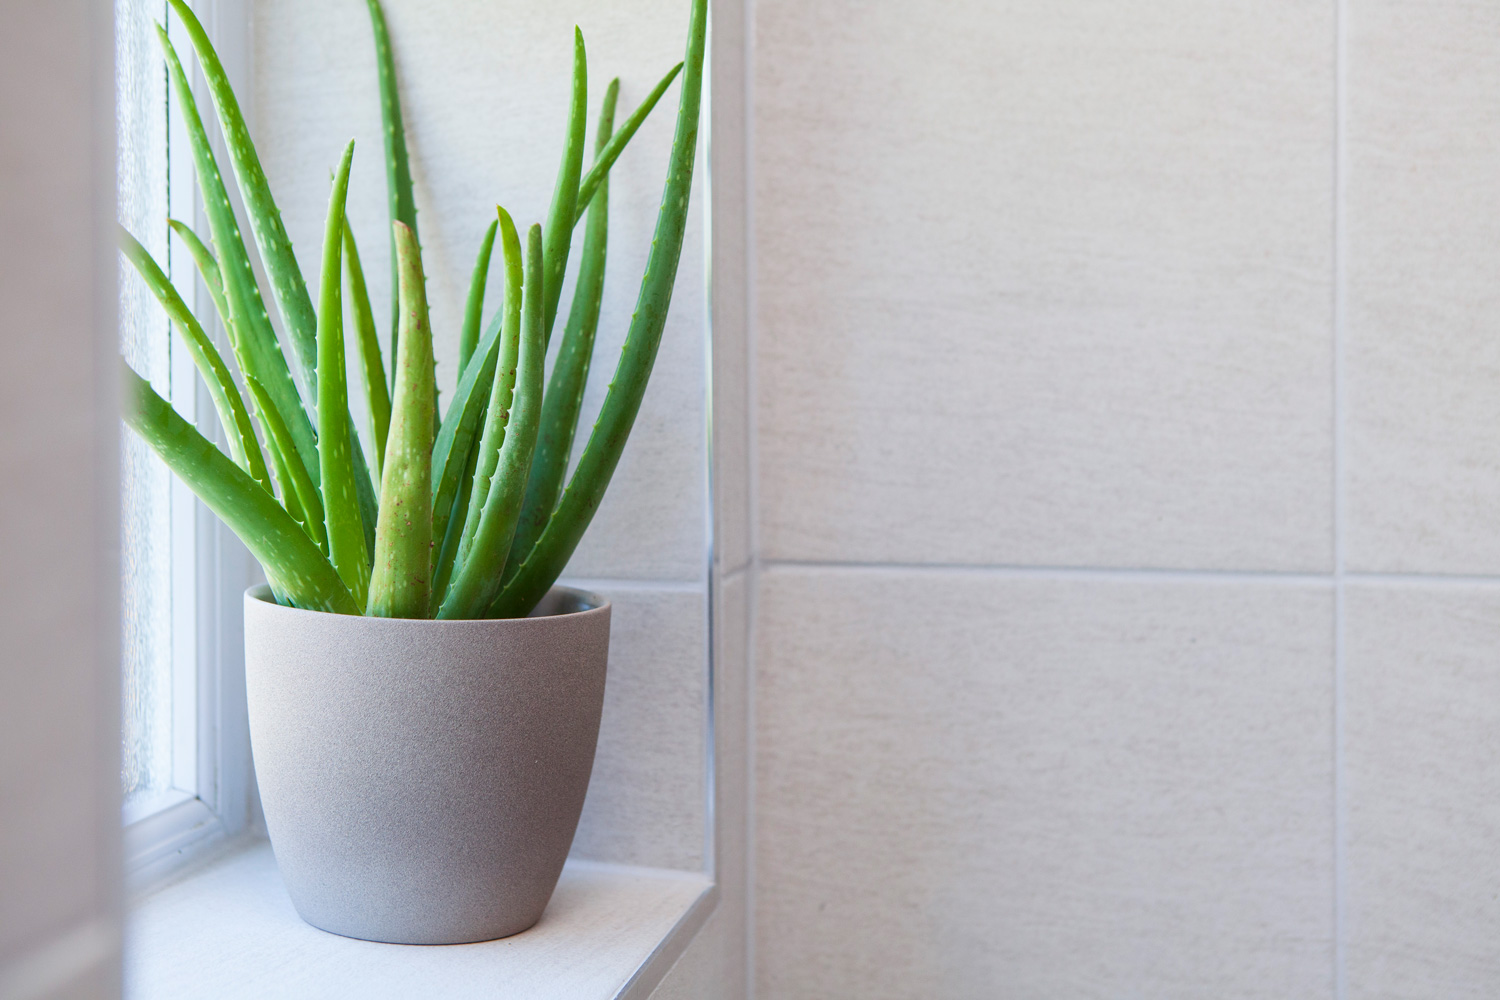 Aloe Vera plant in a pot in a tiled bathroom with copy space to the right, Aloe Vera plant in bathroom